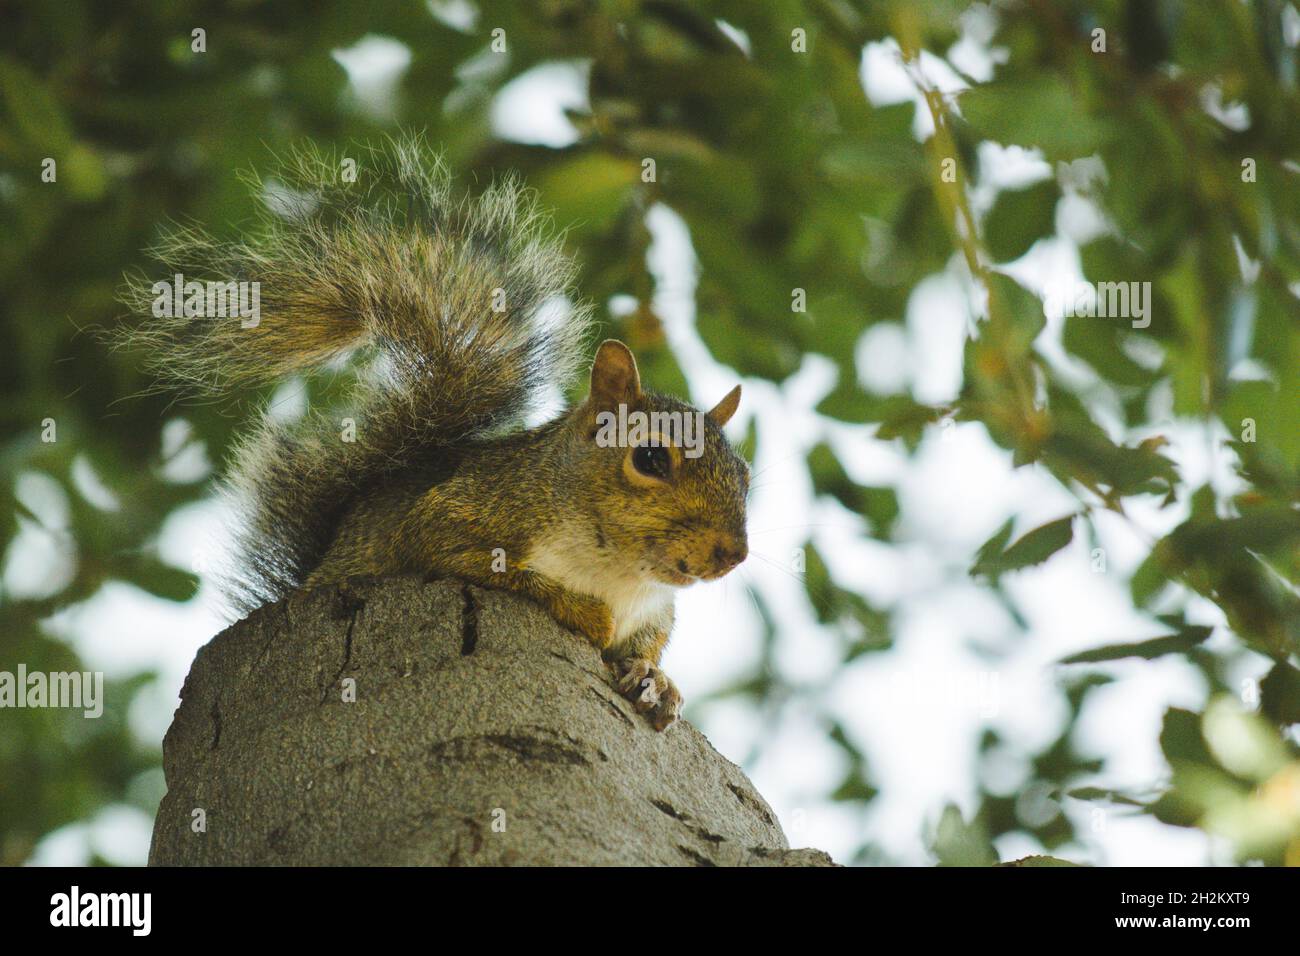 Eastern grey squirrel looking at camera, sitting on stump in California Live Oak Tree Stock Photo